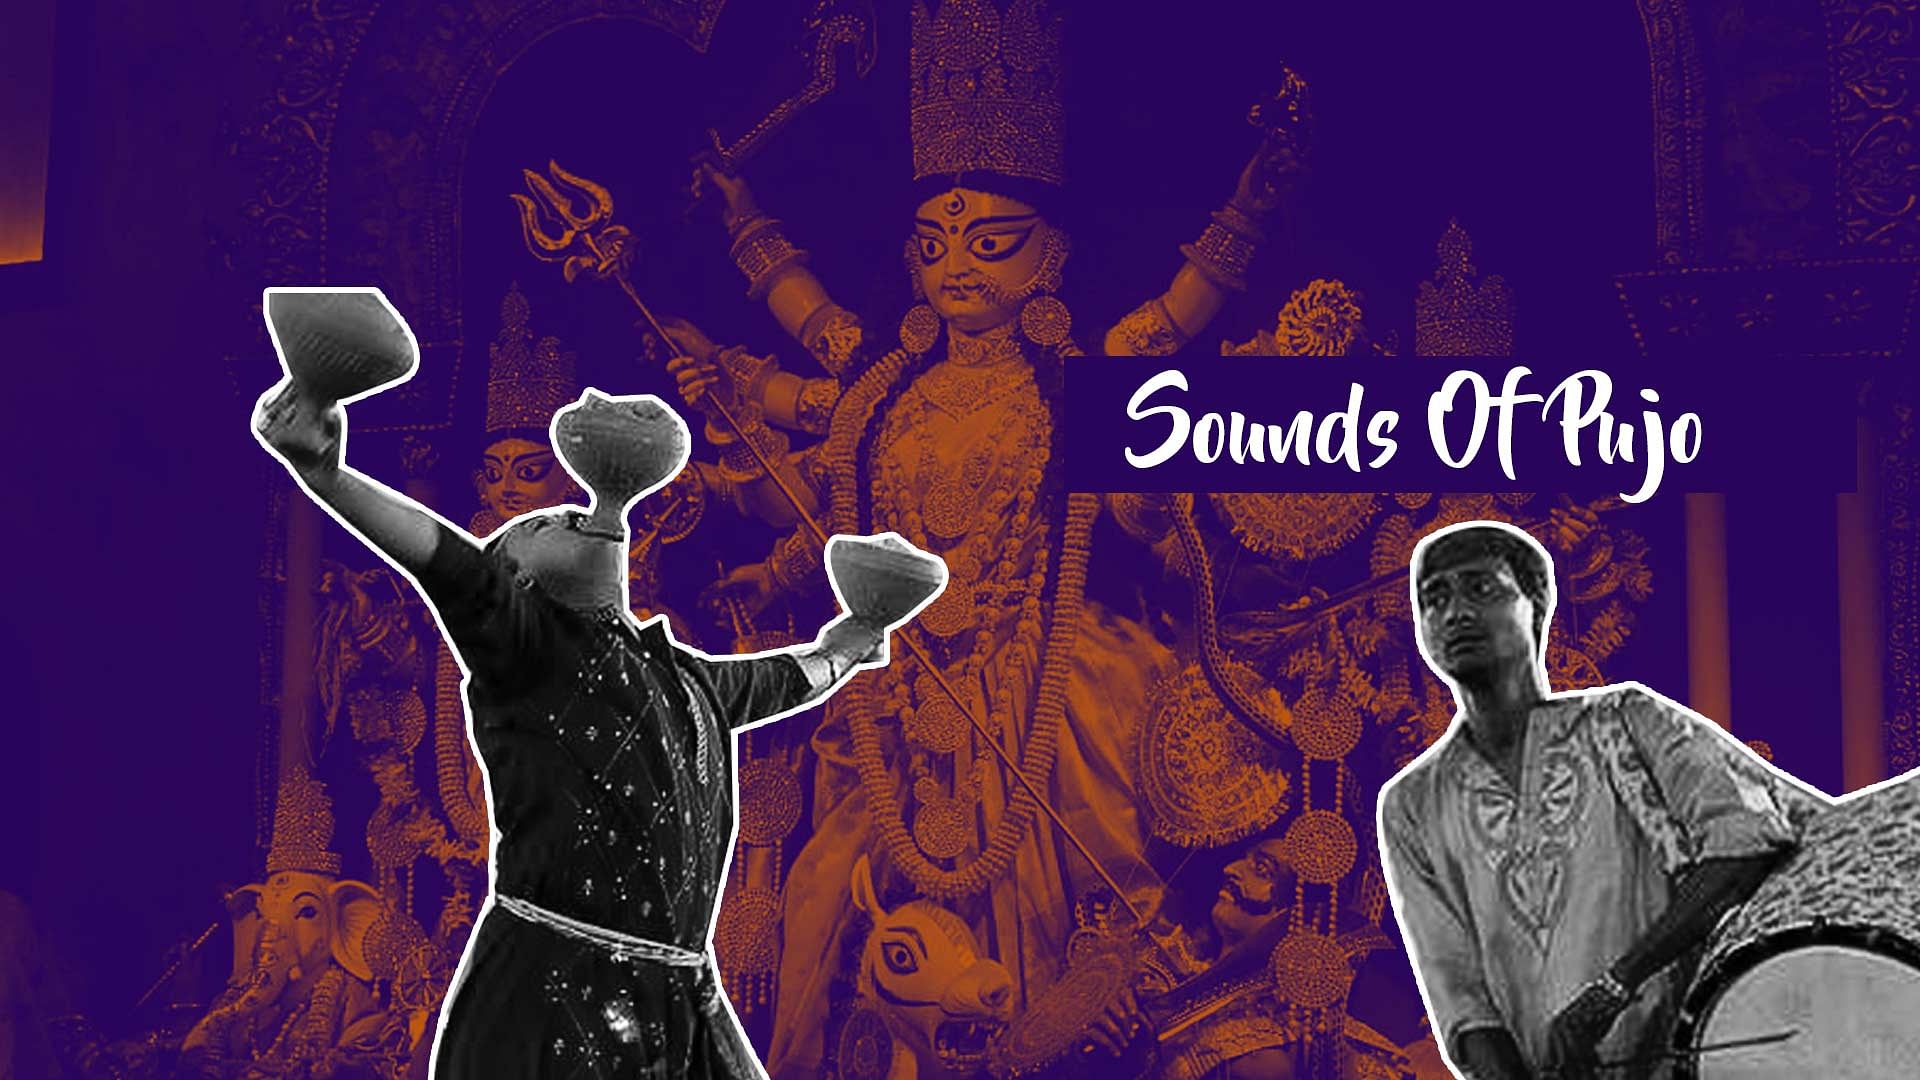 Some of the Bengali Quintees tell us about the different sounds of Durga Puja, and what they mean to them.